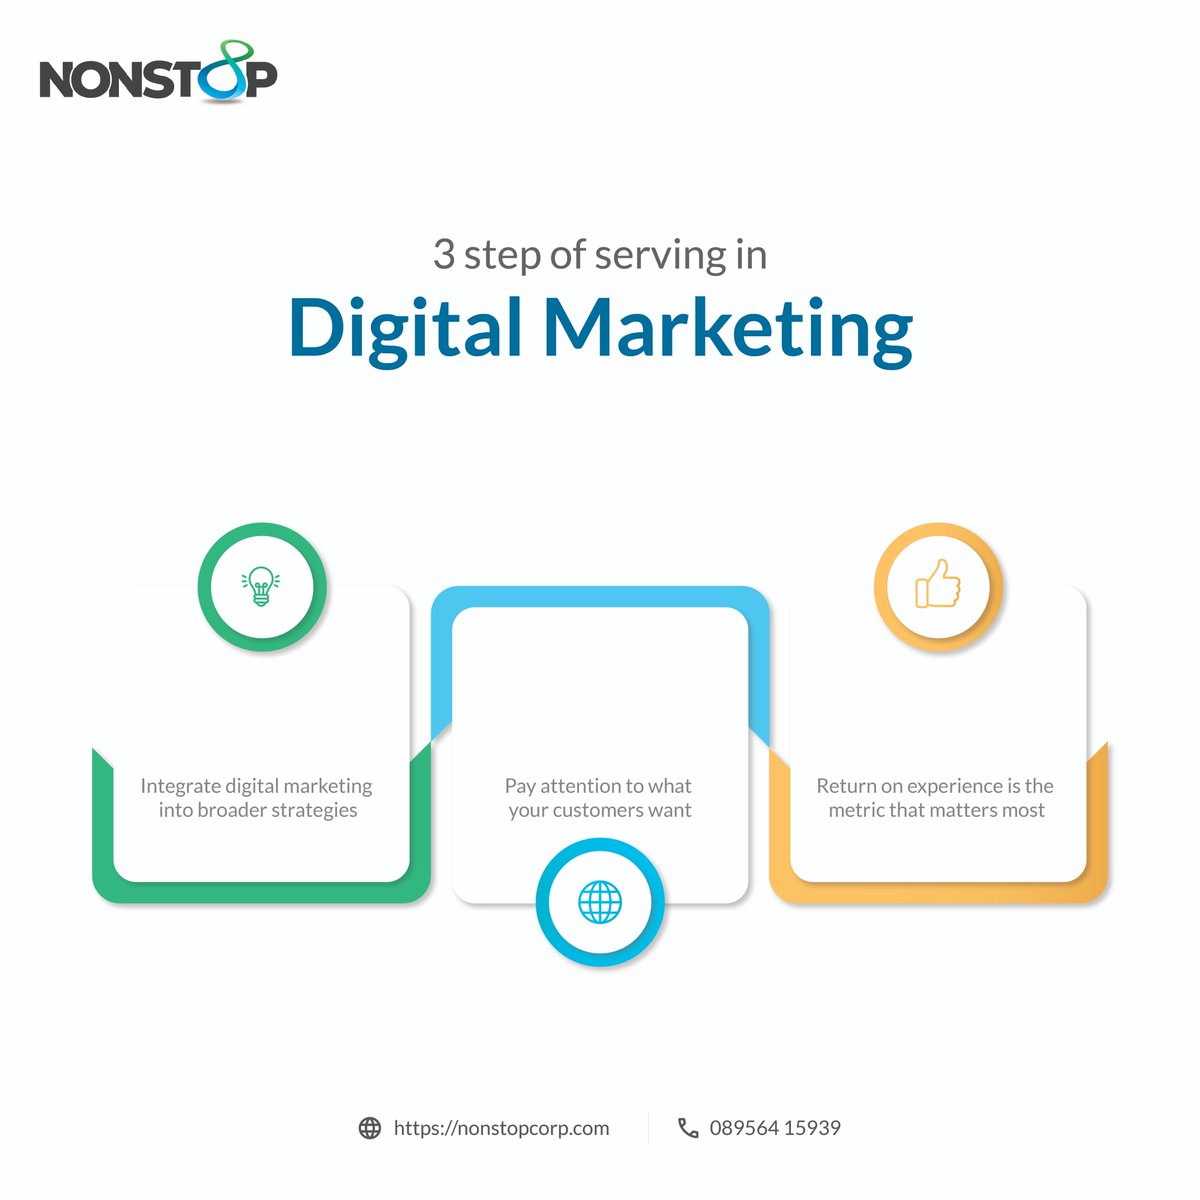 3 step of serving in #DigitalMarketing 

1️⃣ Integrate digital marketing into broader strategies.
2️⃣ Pay attention to what your customers want.
3️⃣ Return on experience is the metric that matters most.
#DigitalMarketingStrategy #MarketingMetrics #DigitalExperience #UserEngagement